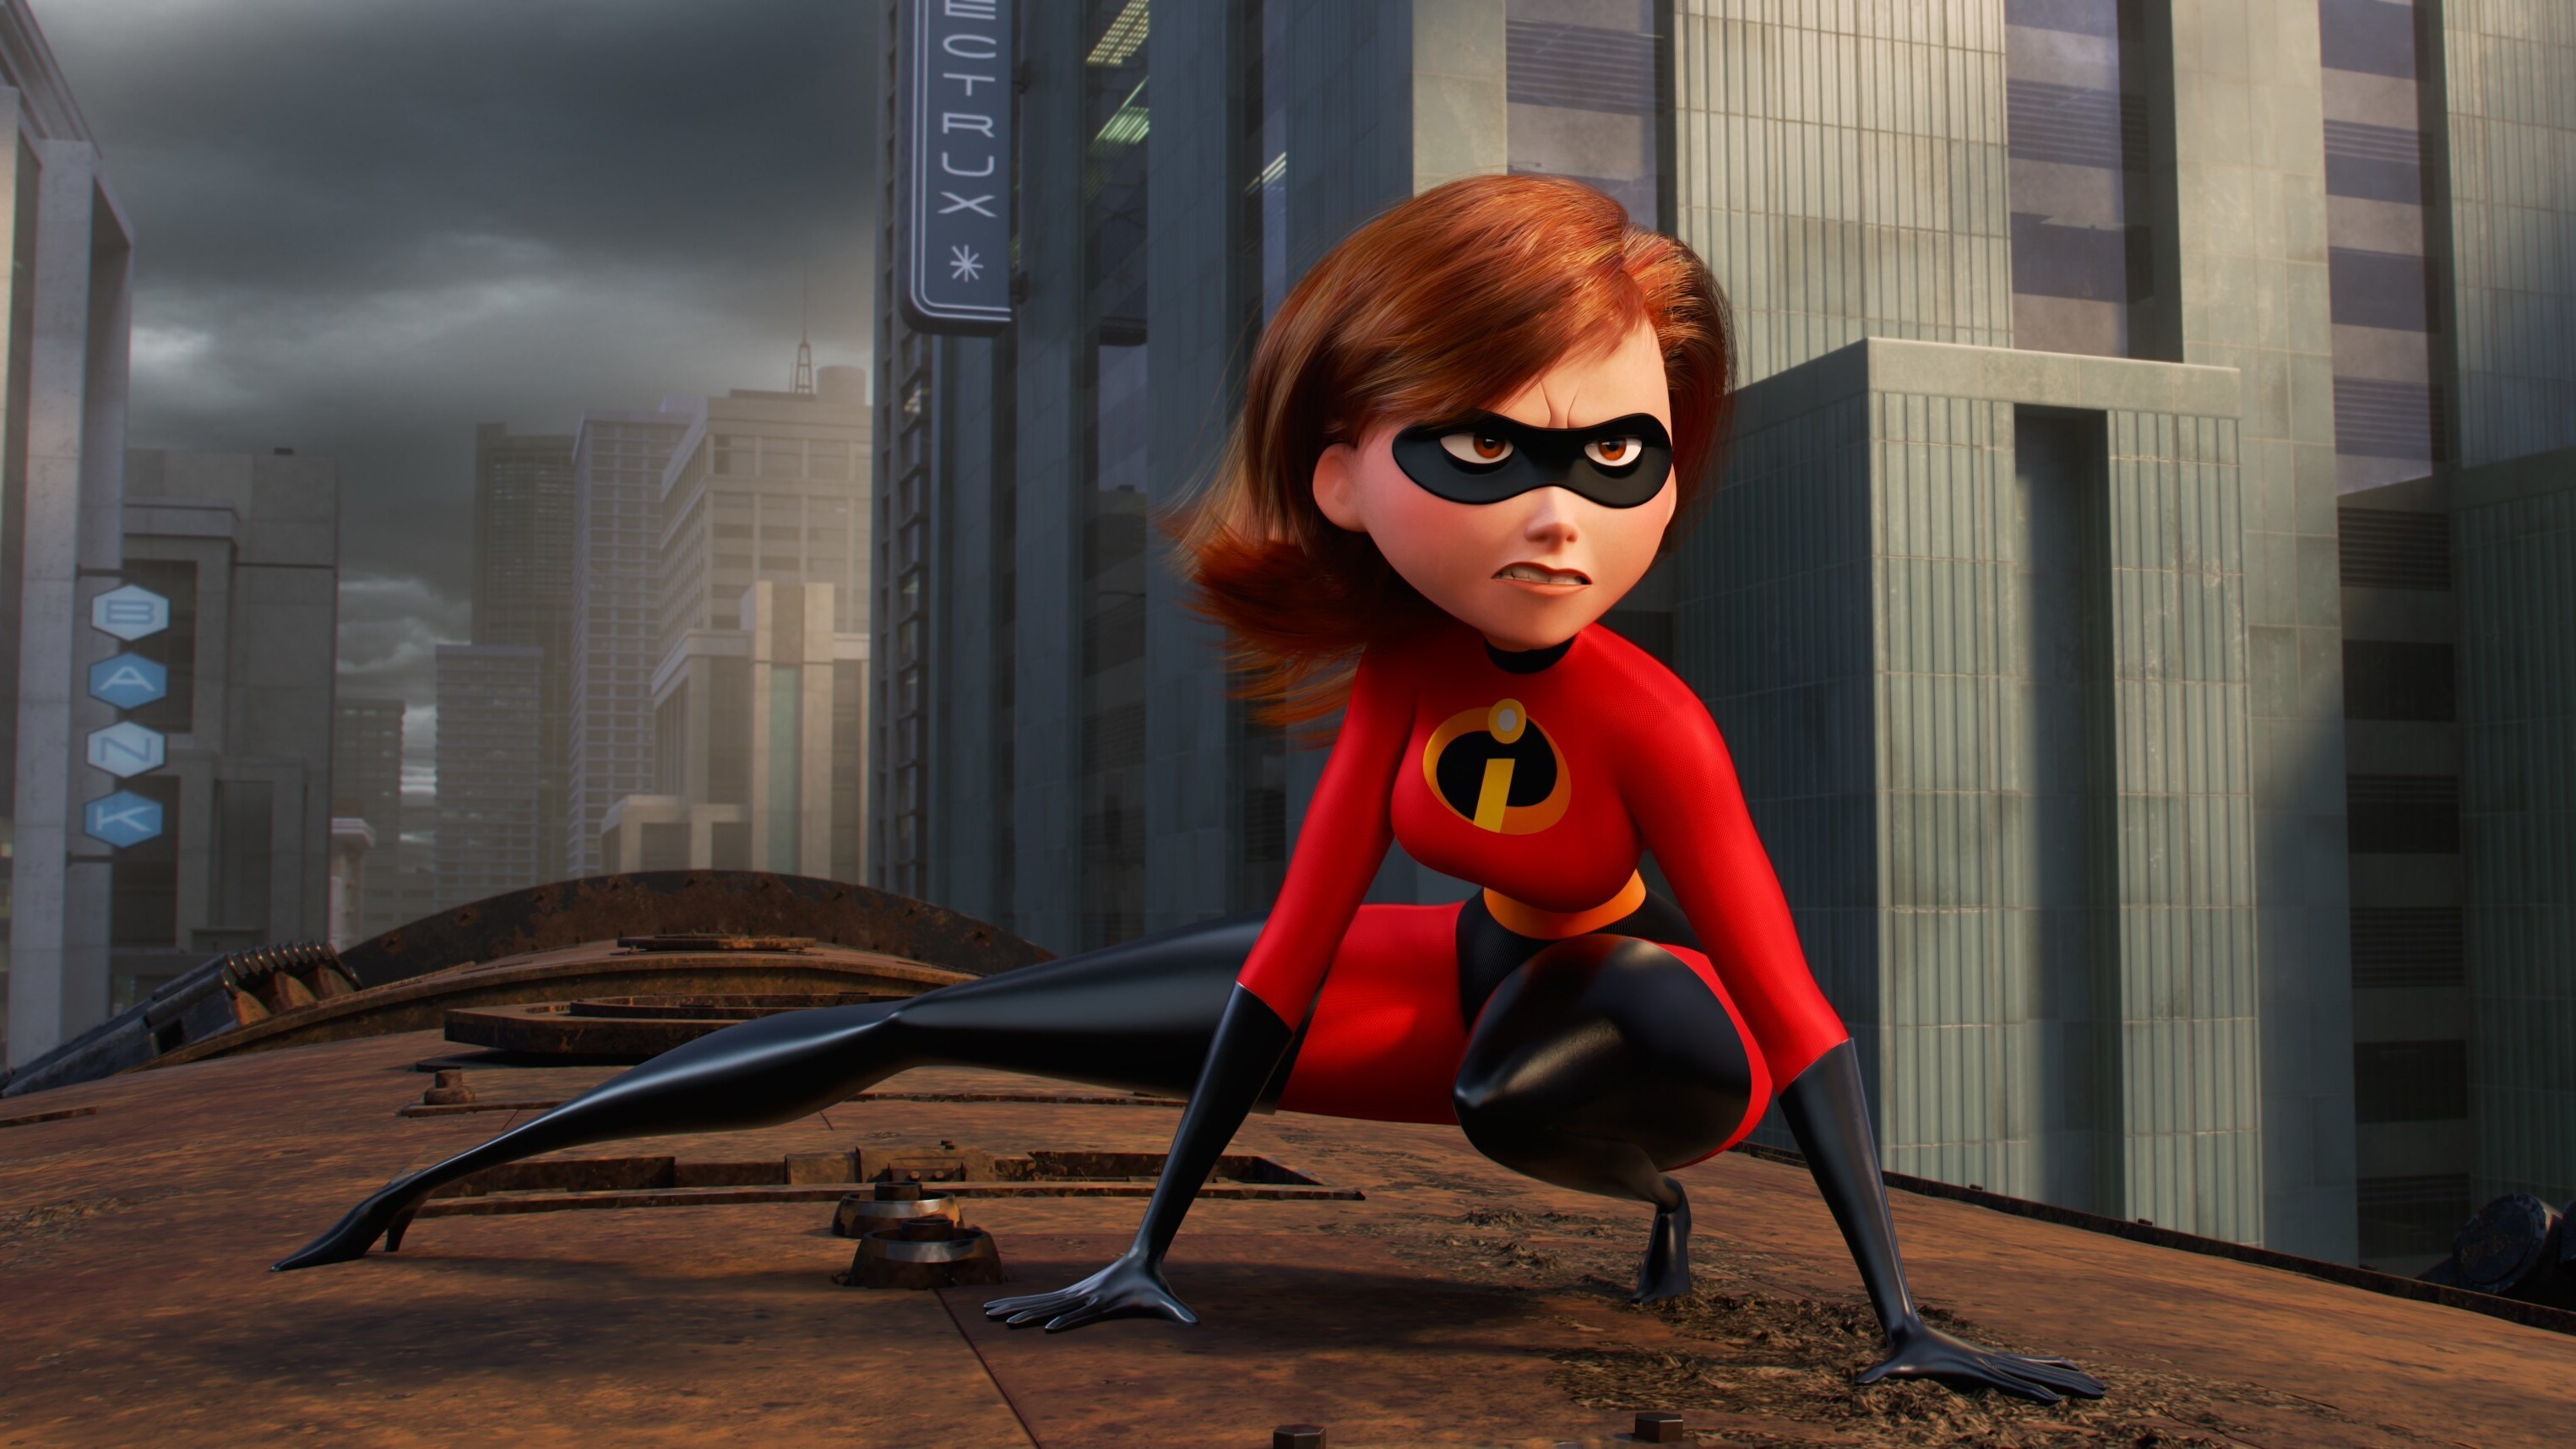 Behind the Scenes of Creating the World of Incredibles 2